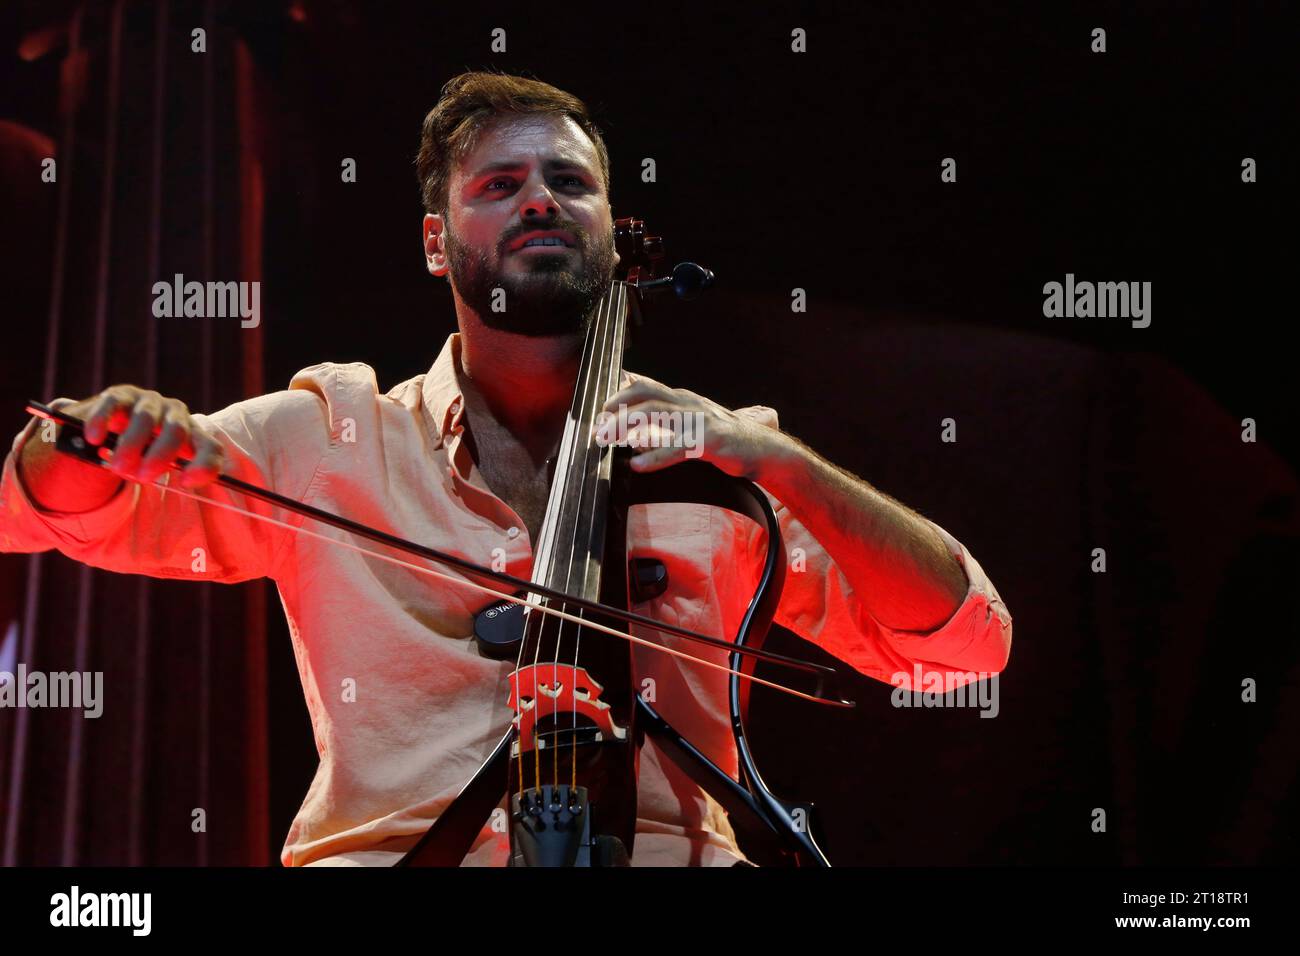 October 11, 2023, Madrid, Madrid, Spain: The Croatian cellist, Stjepan Hauser (Pula, 1986), known artistically as Hauser, is seen on stage during a concert of his first solo world tour 'Rebel with a cello', at the WiZink Center, in Madrid (Spain). Stjepan Hauser, founding member of the duo 2Cellos arrives in Spain with his first solo show, 'Rebel with a cello'. As in the 2Cellos concerts, the new show includes innovative sound, lighting and image effects, and careful staging, with Hauser at the center of the stage accompanied by an orchestra of string, wind and percussion instruments. On this Stock Photo